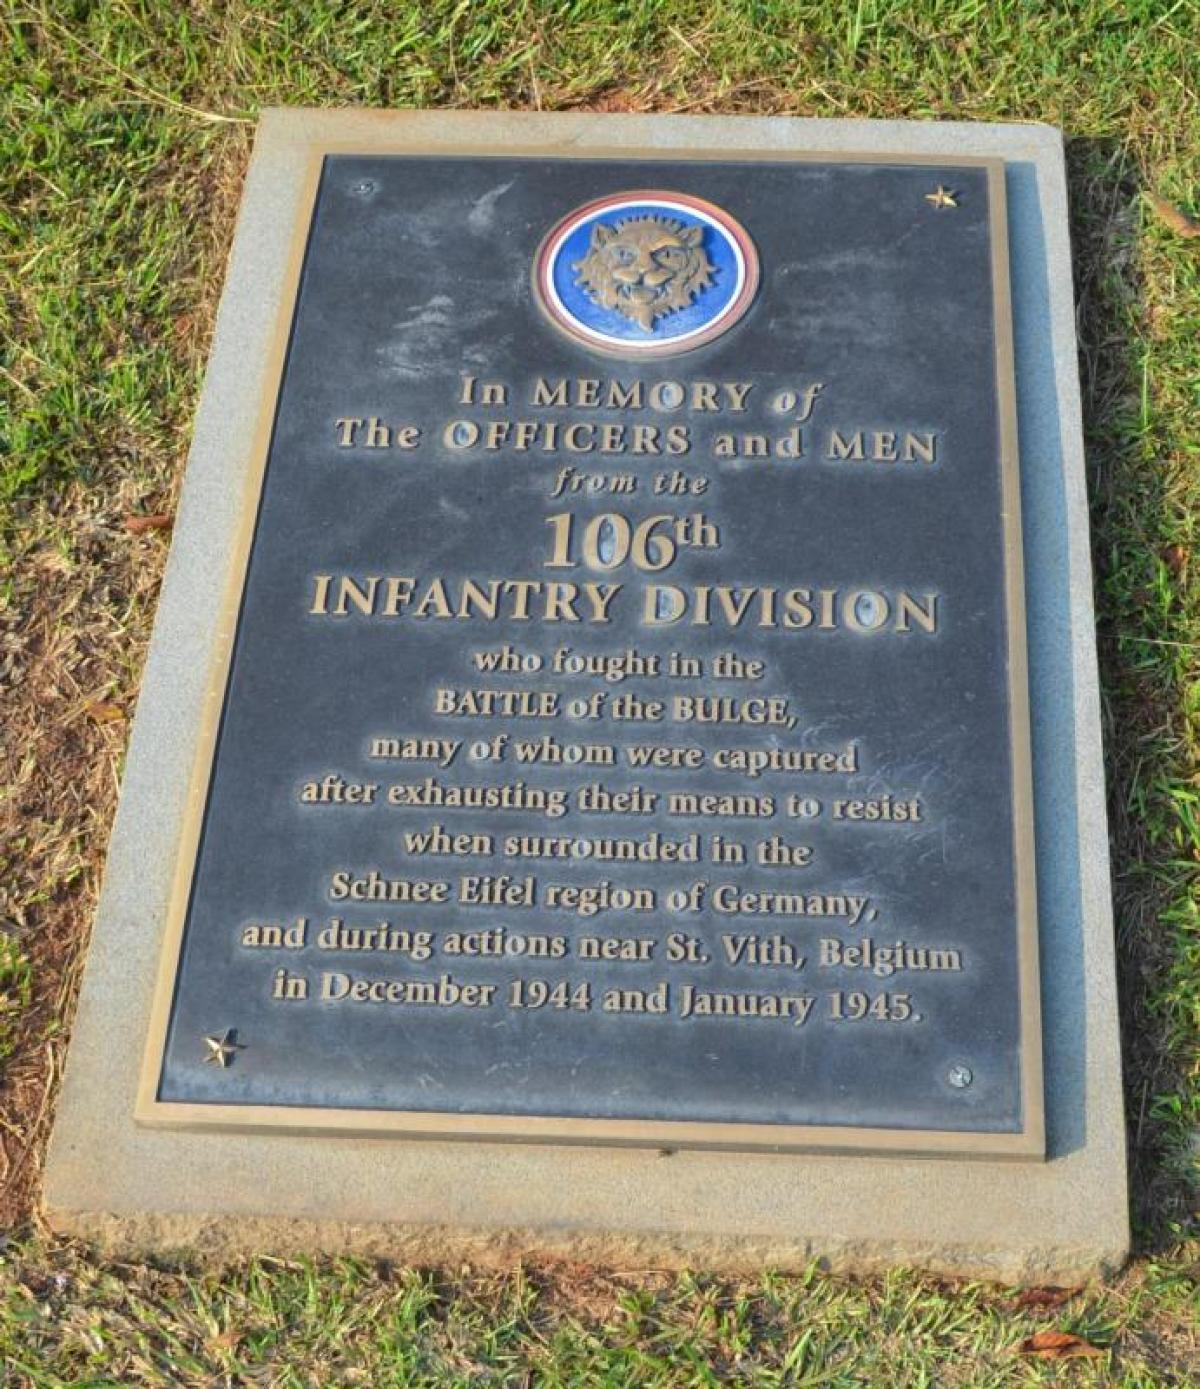 OK, Grove, Headstone Symbols and Meanings, U. S. Army 106th Infantry Division (Golden Lion)